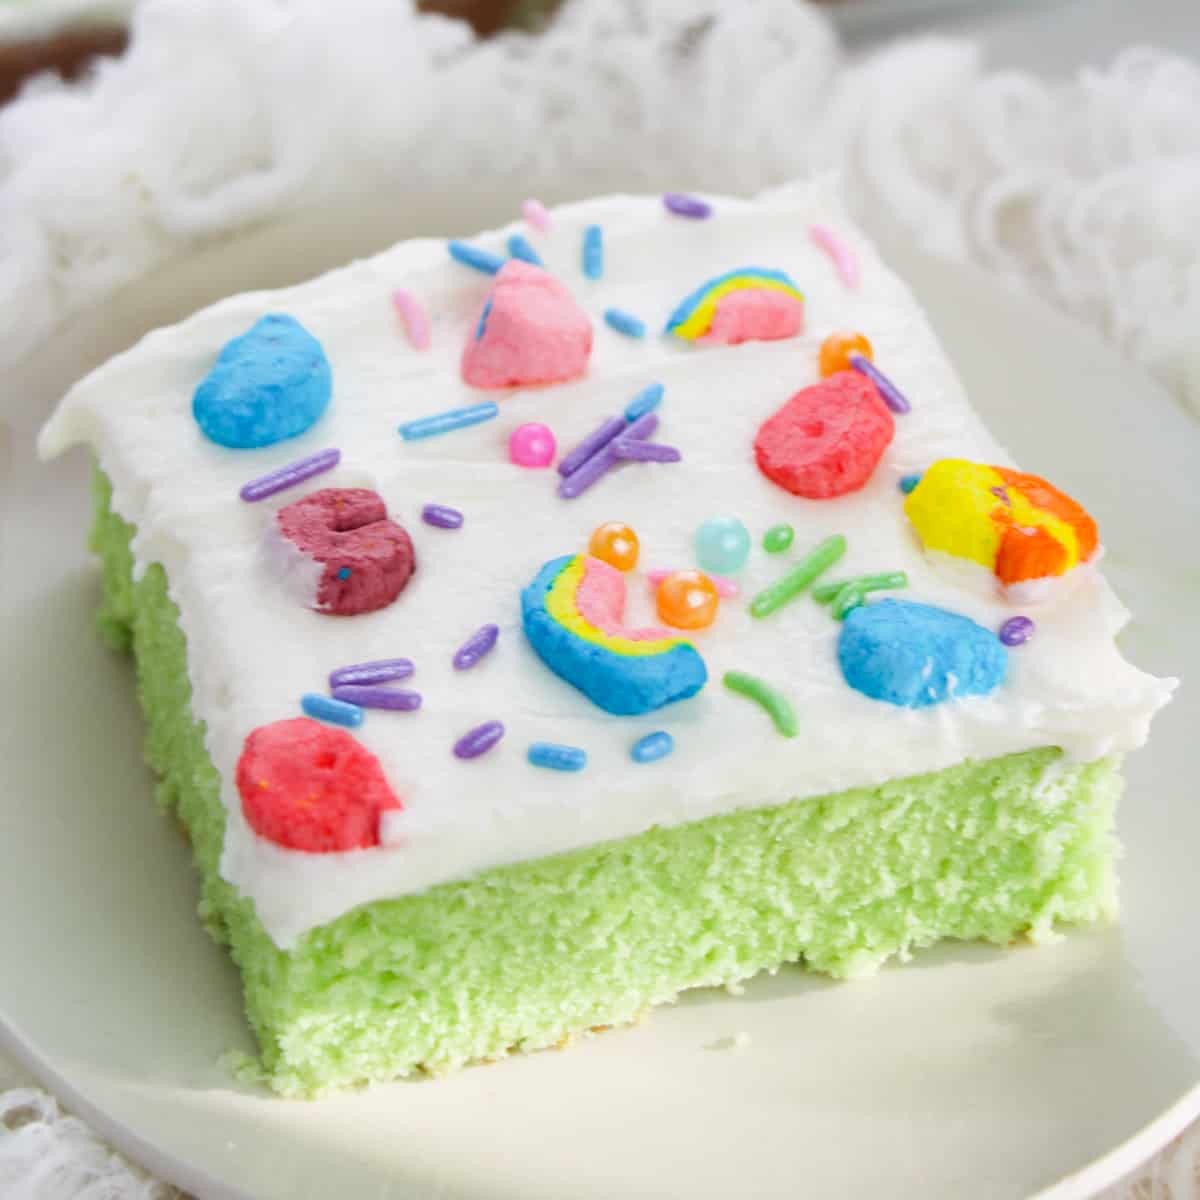 Slice of lucky charms cereal cake on white plate. The cake is bright green with white frosting topped with rainbow sprinkles and lucky charms marshmallows.